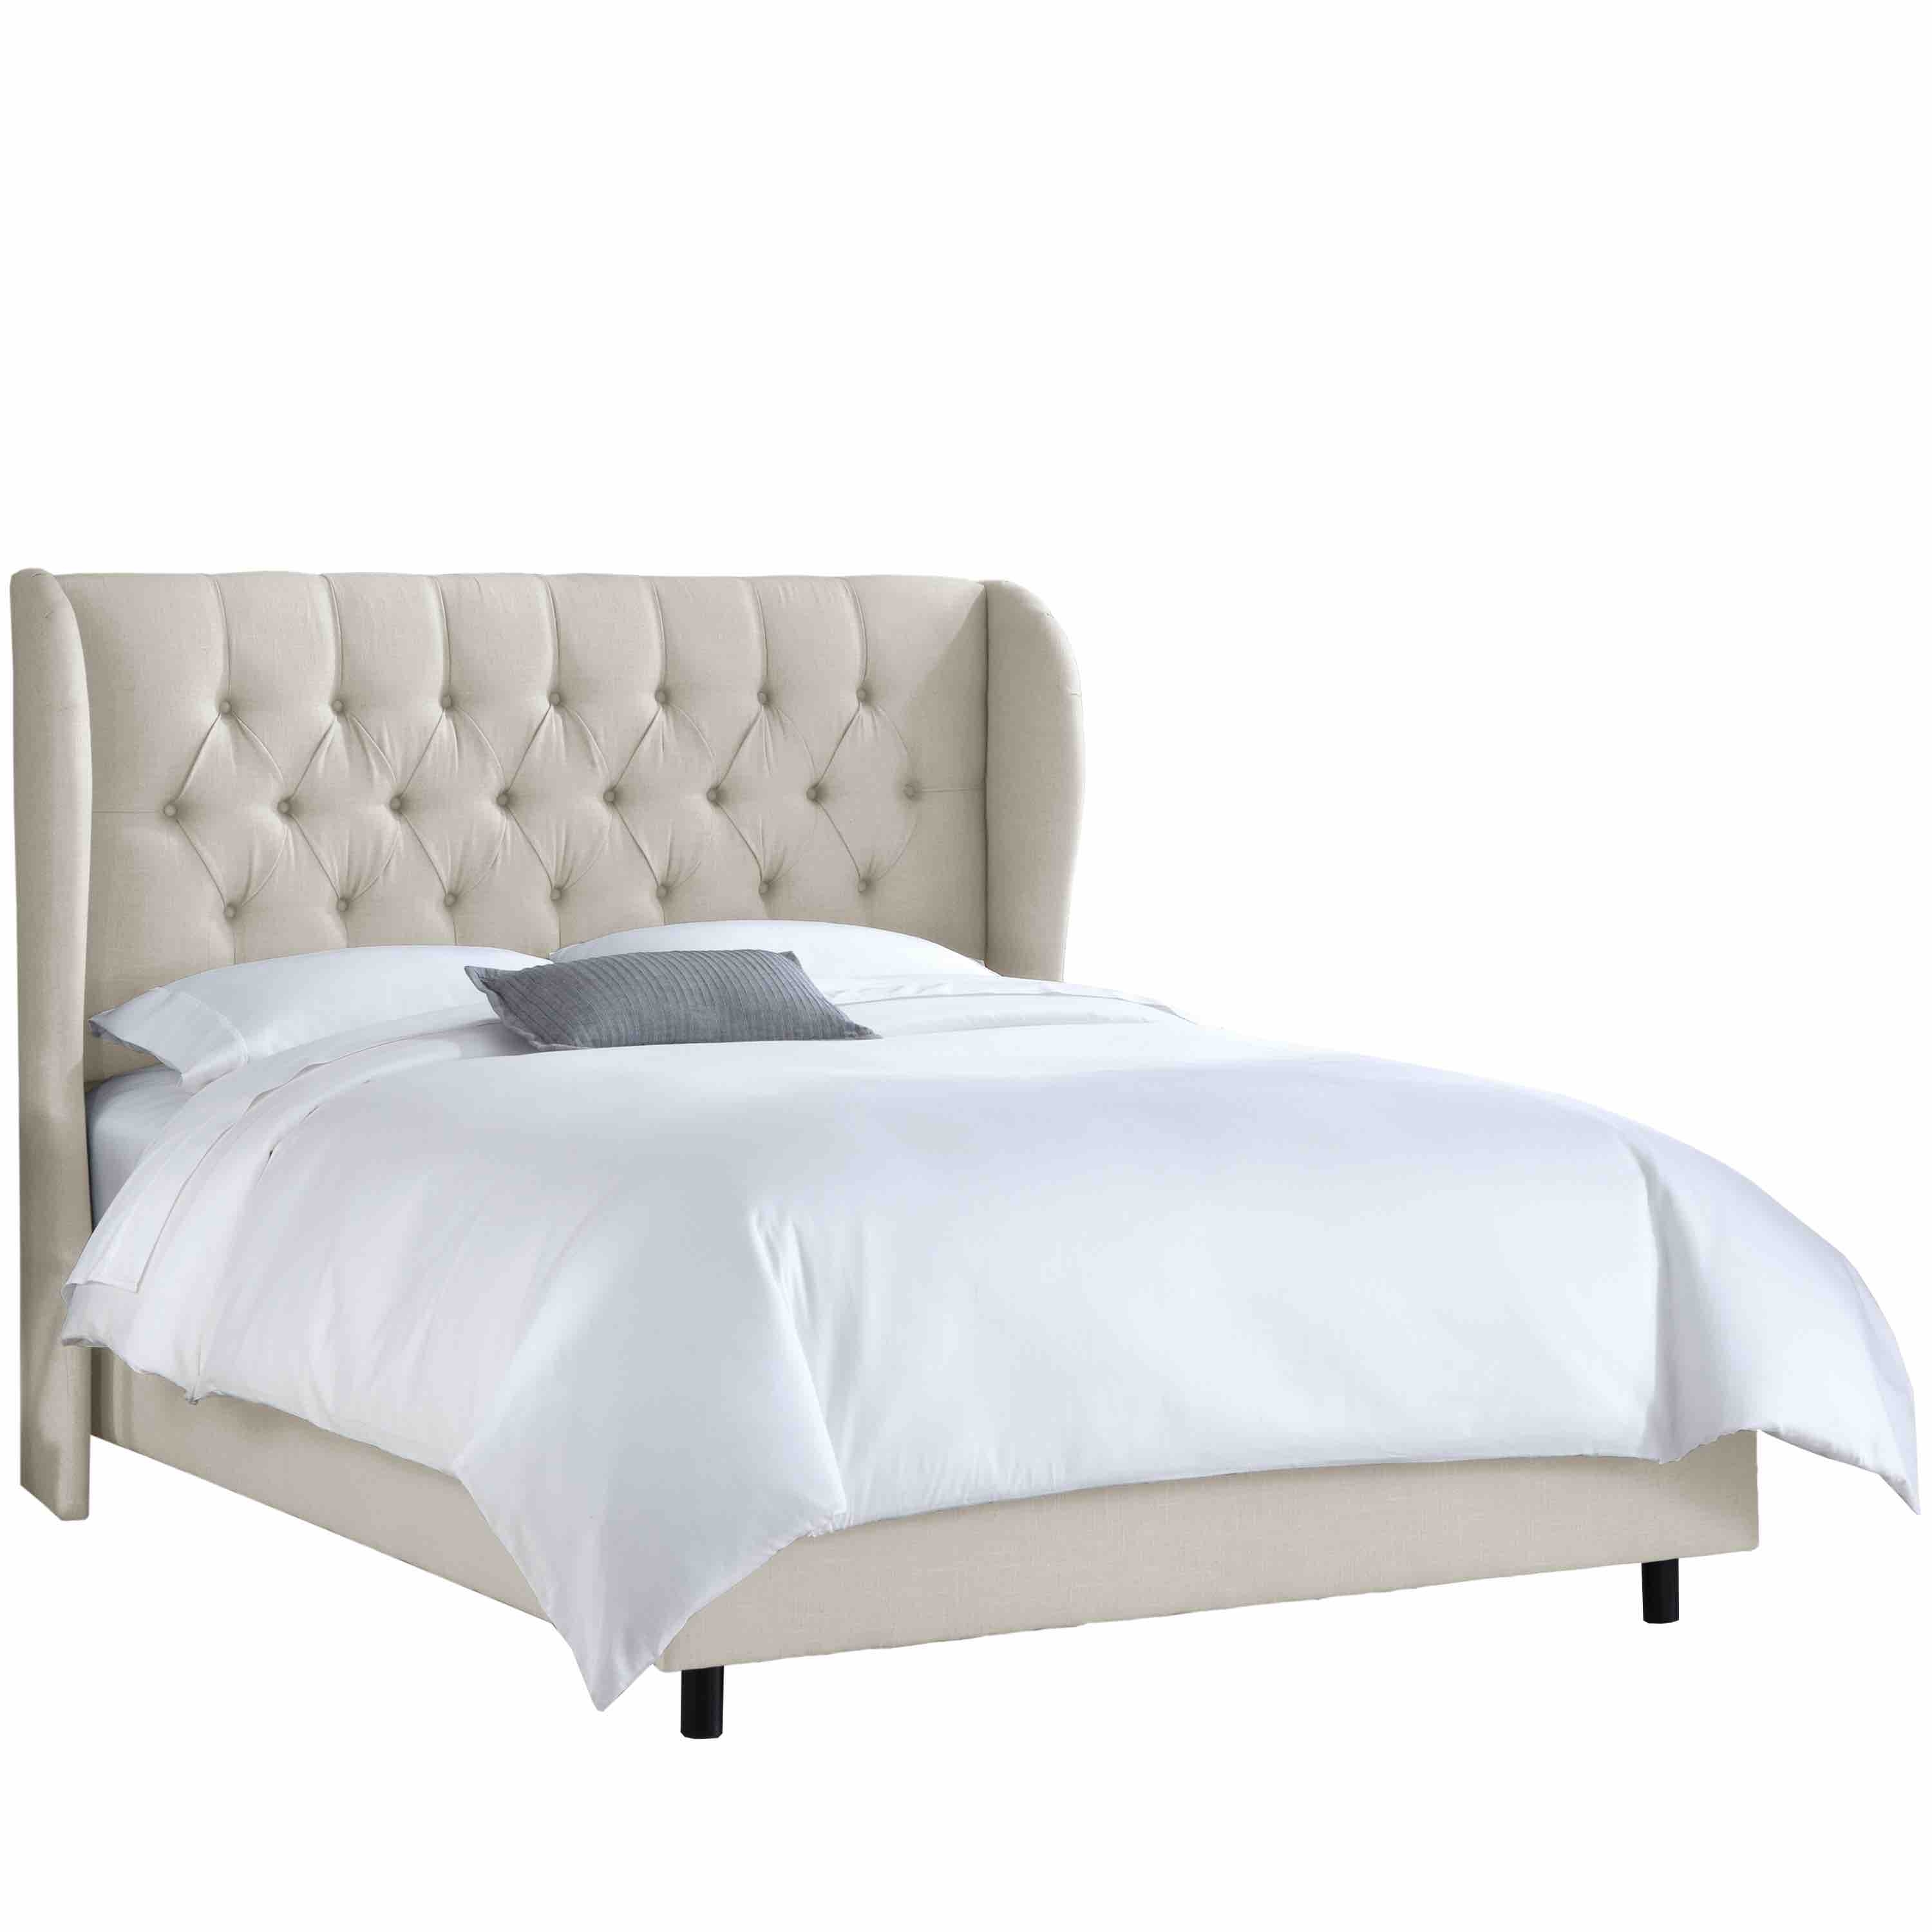 King Tufted Wingback Bed in Linen talc - Image 0